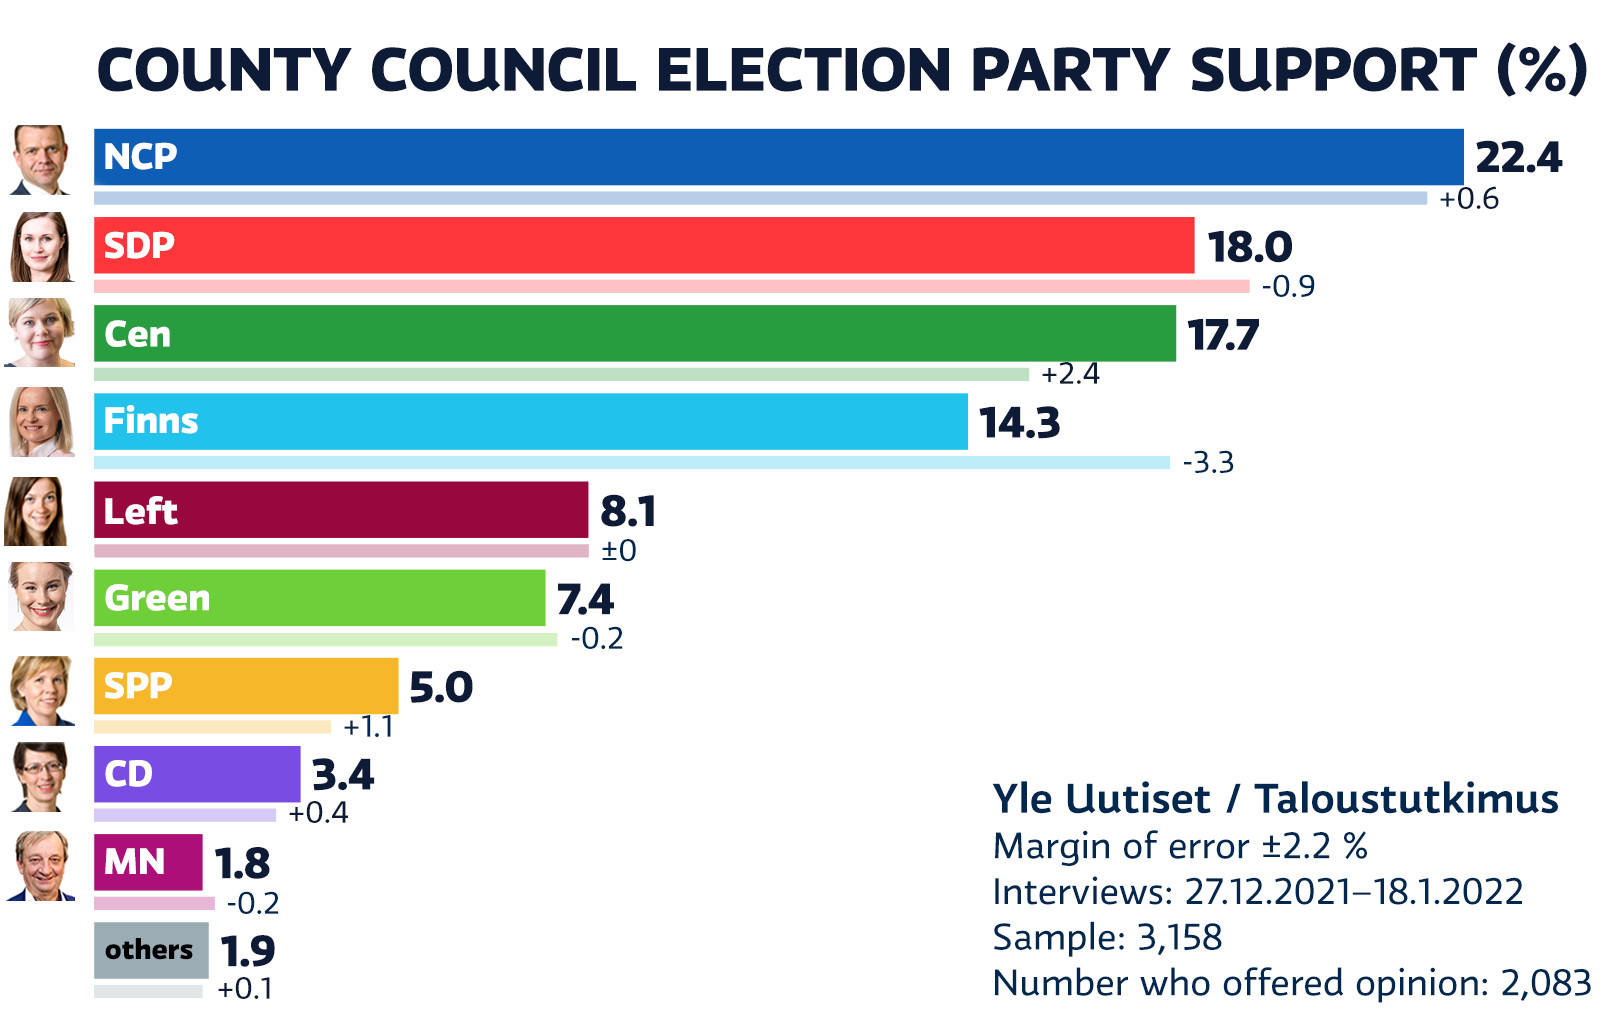 Yle's provincial election: NCP strengthens its leadership, Center challenges SDP second